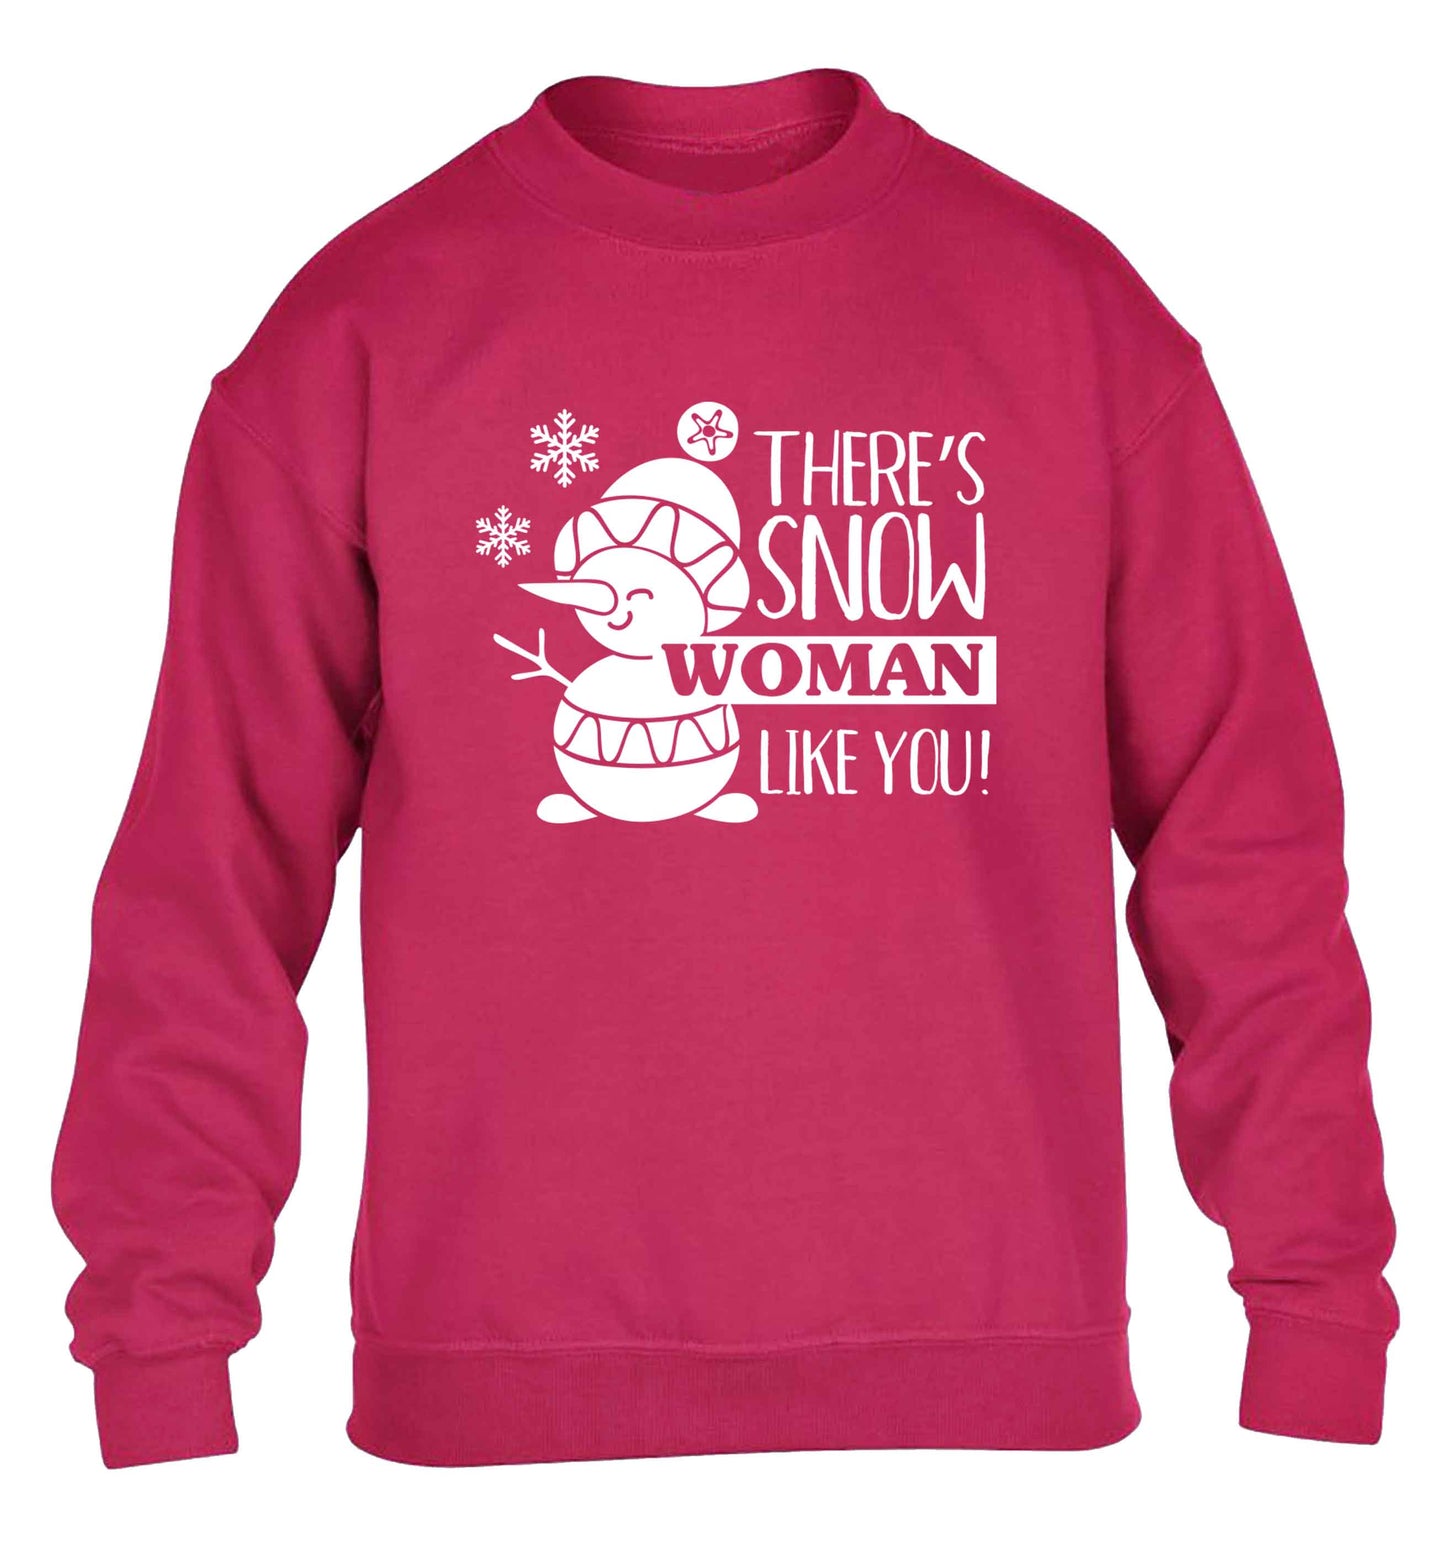 There's snow woman like you children's pink sweater 12-13 Years